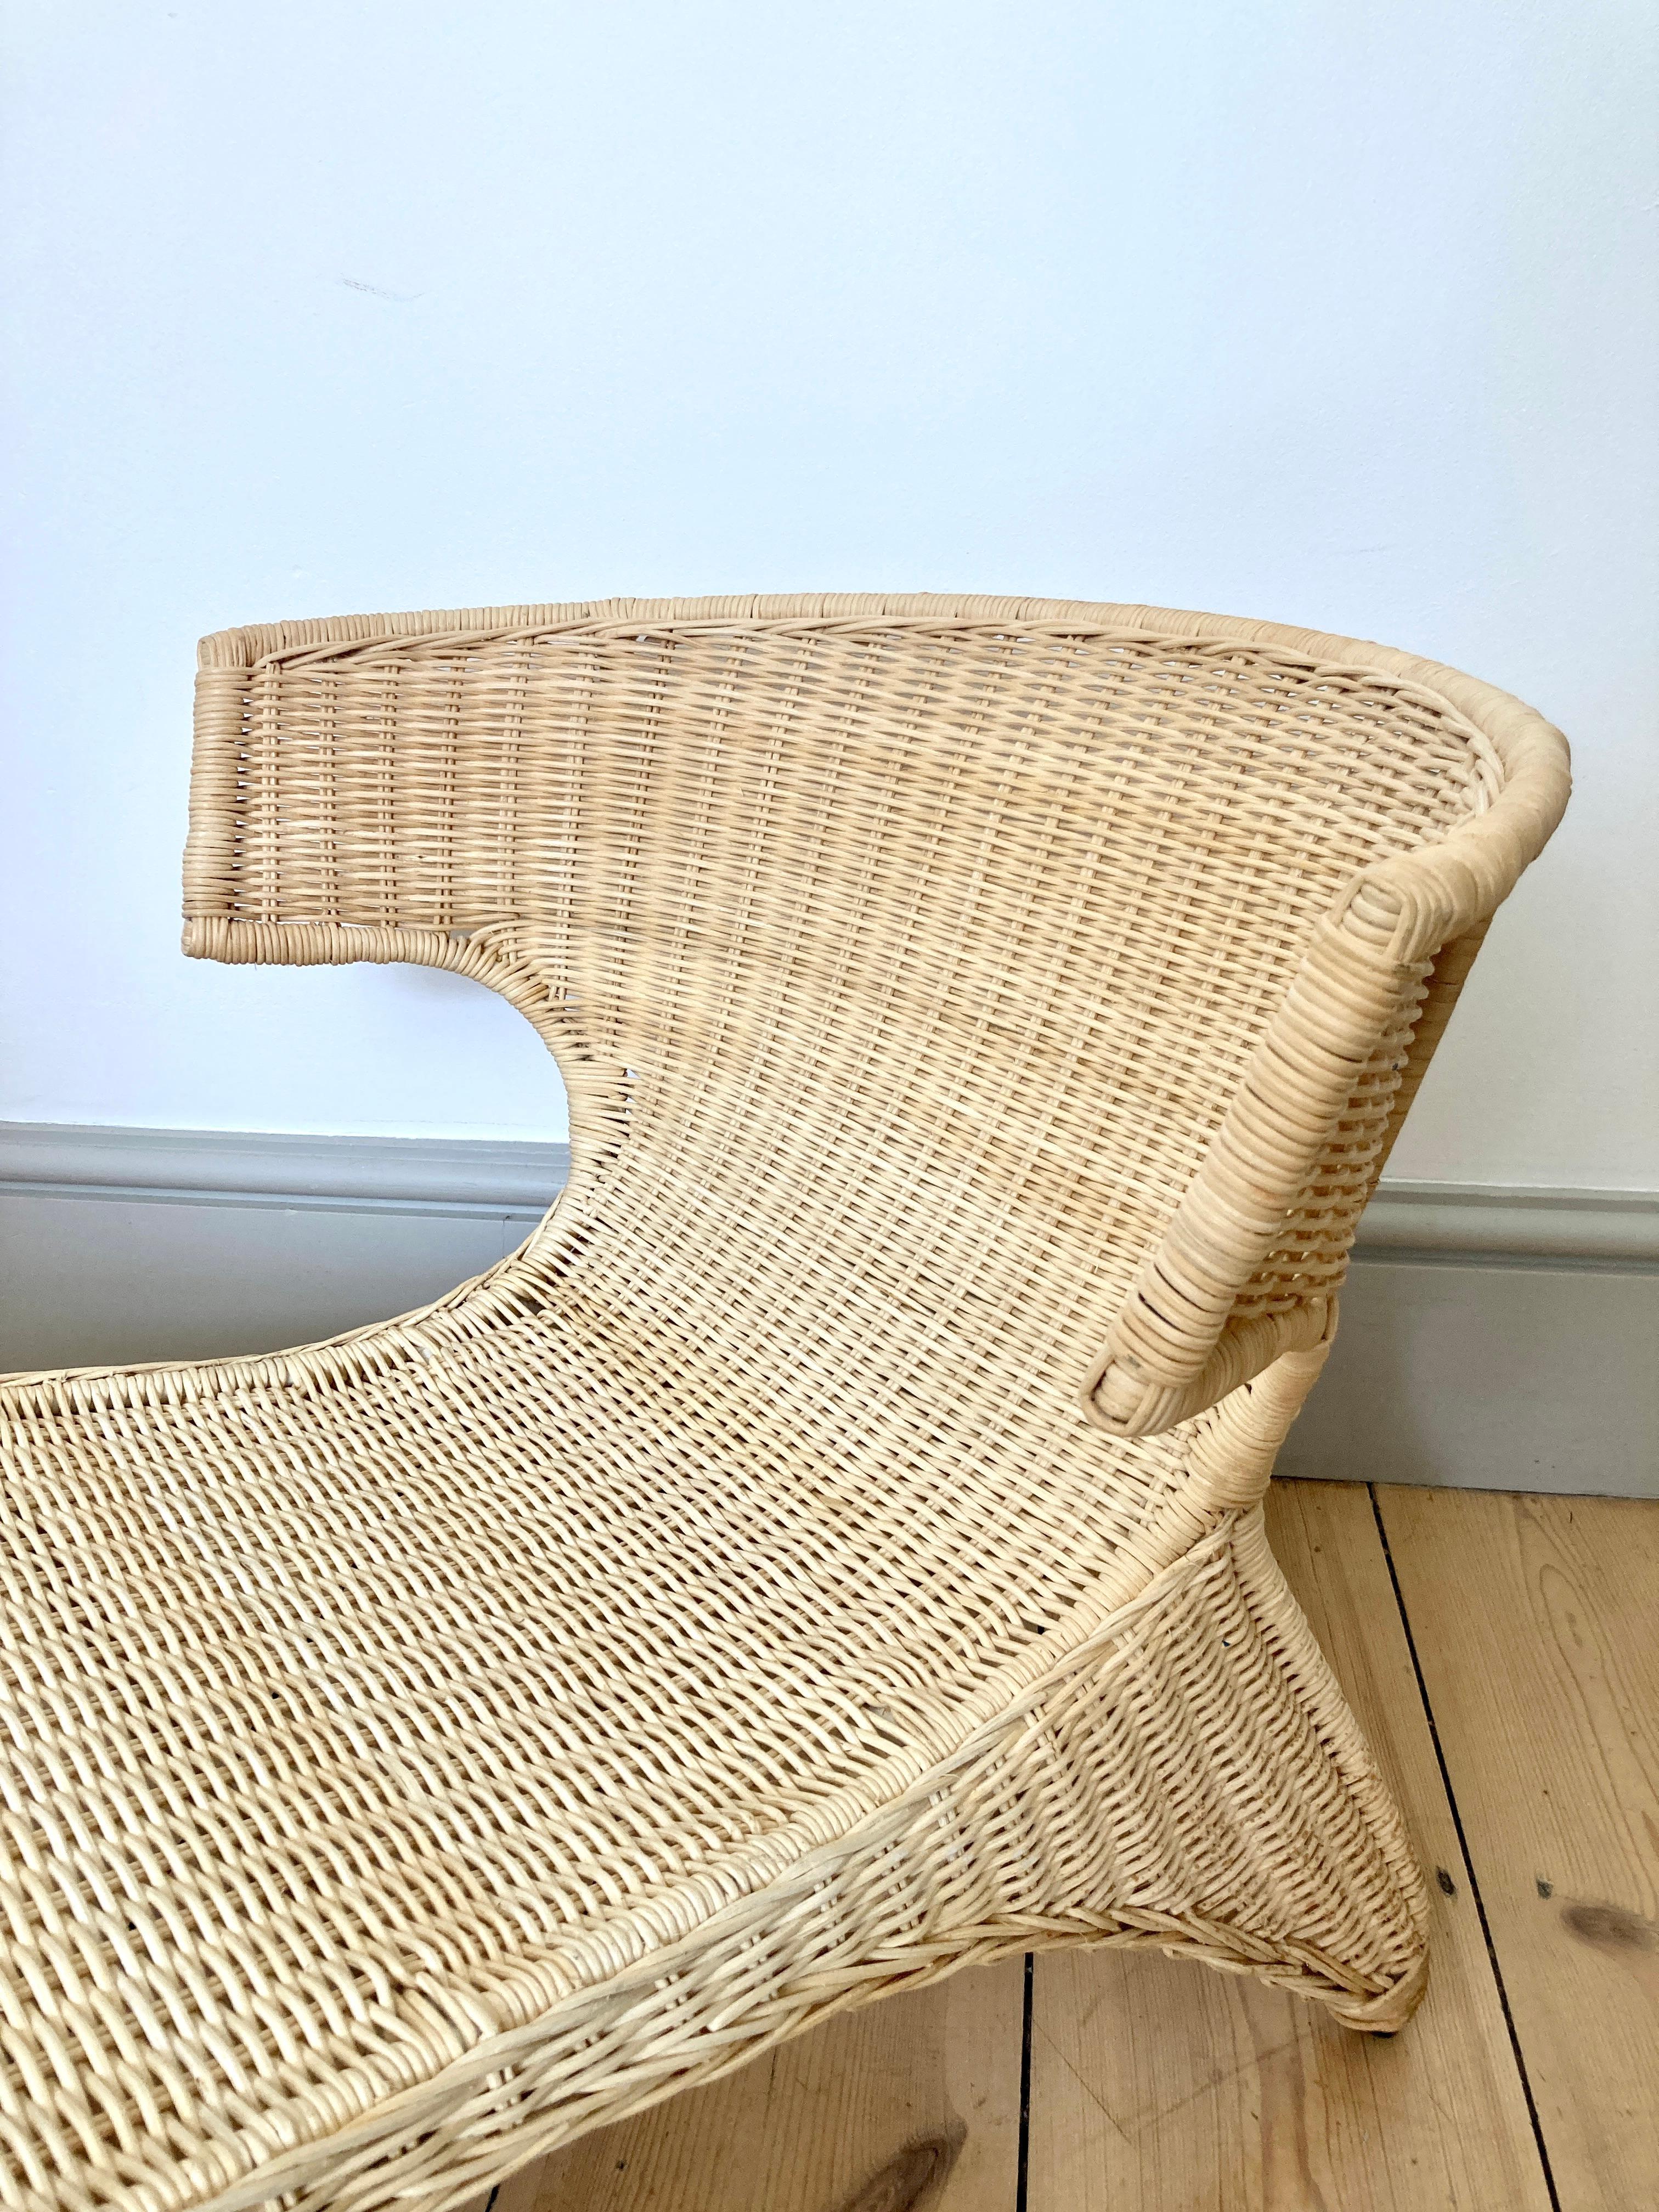 Low Lounge Chair / Chaise Longue by Monika Mulder for Ikea Savo Natural Rattan 2